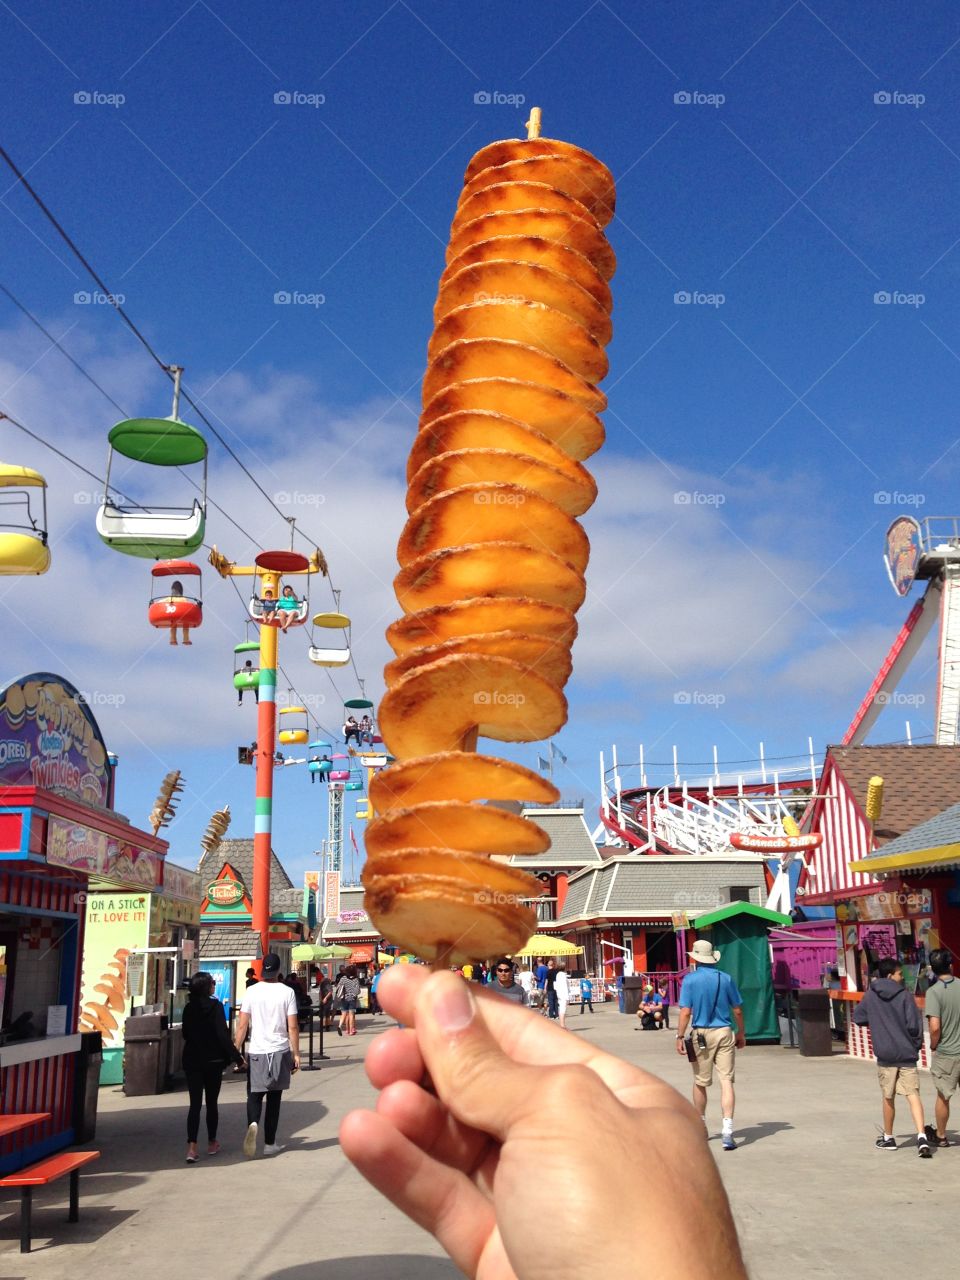 A funny and delicious moment with a strange fried potato at the amusement park